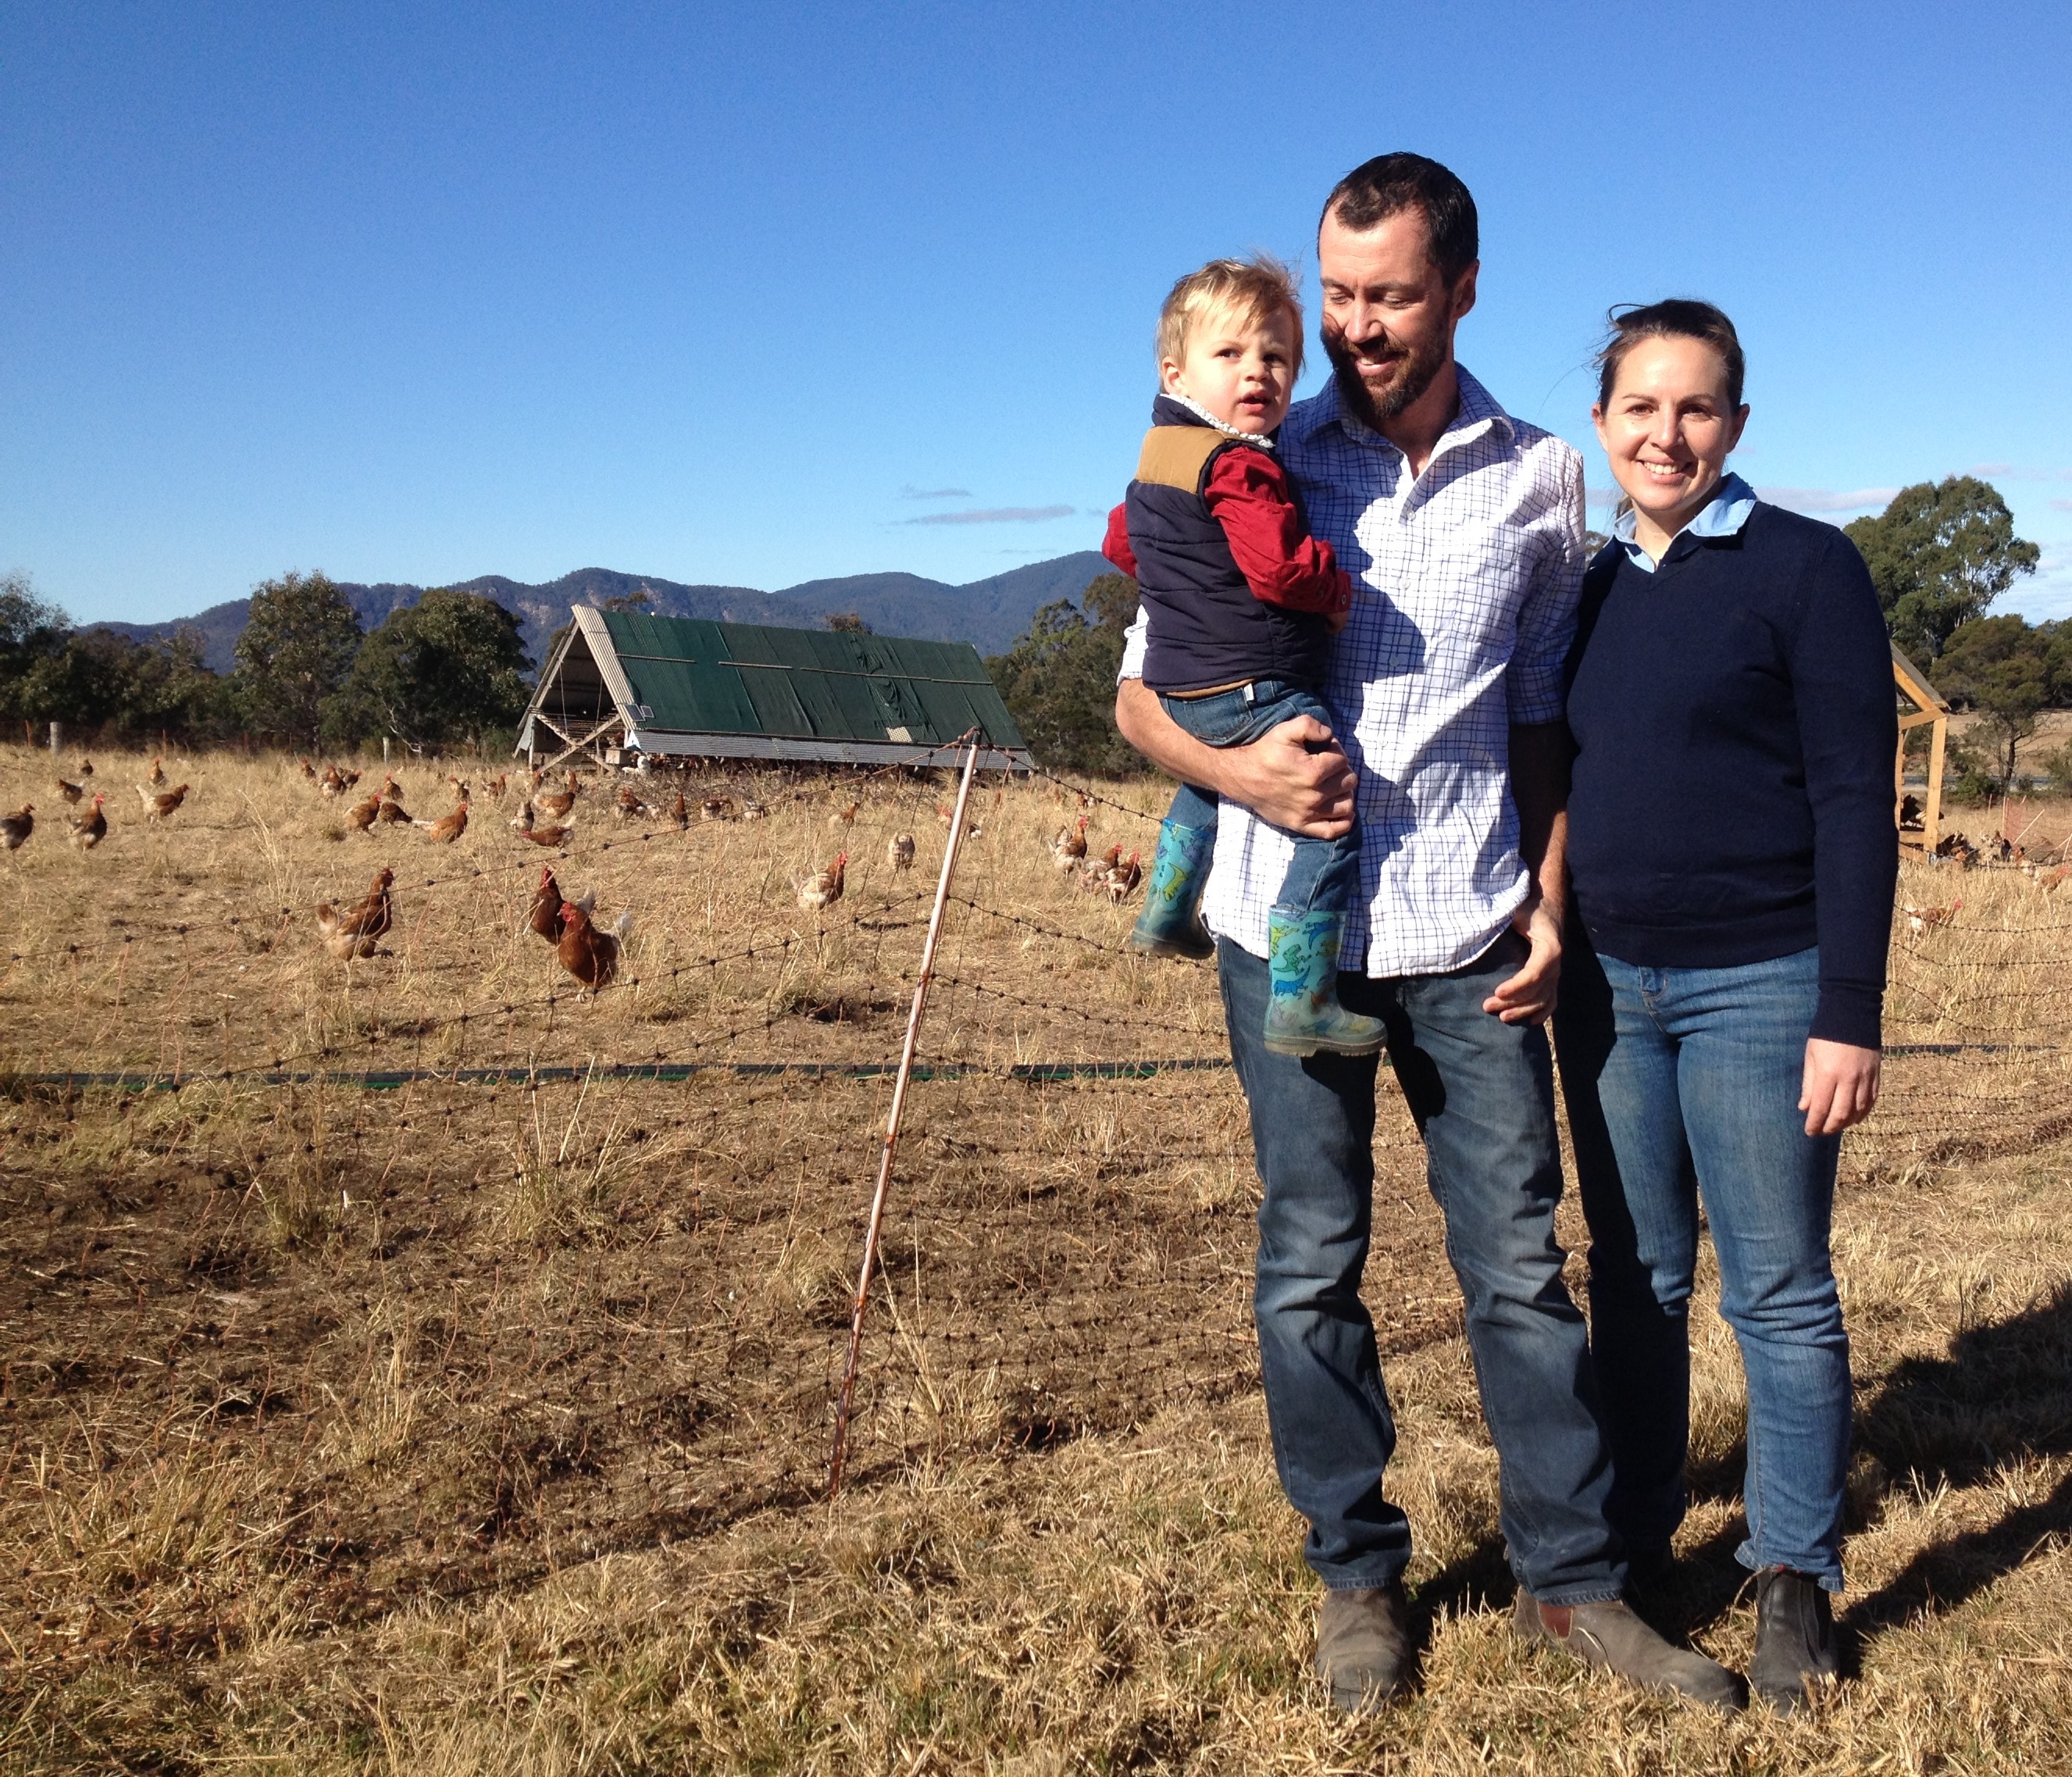 From eggs to meat - the next step for pioneering Bega Valley Eggs